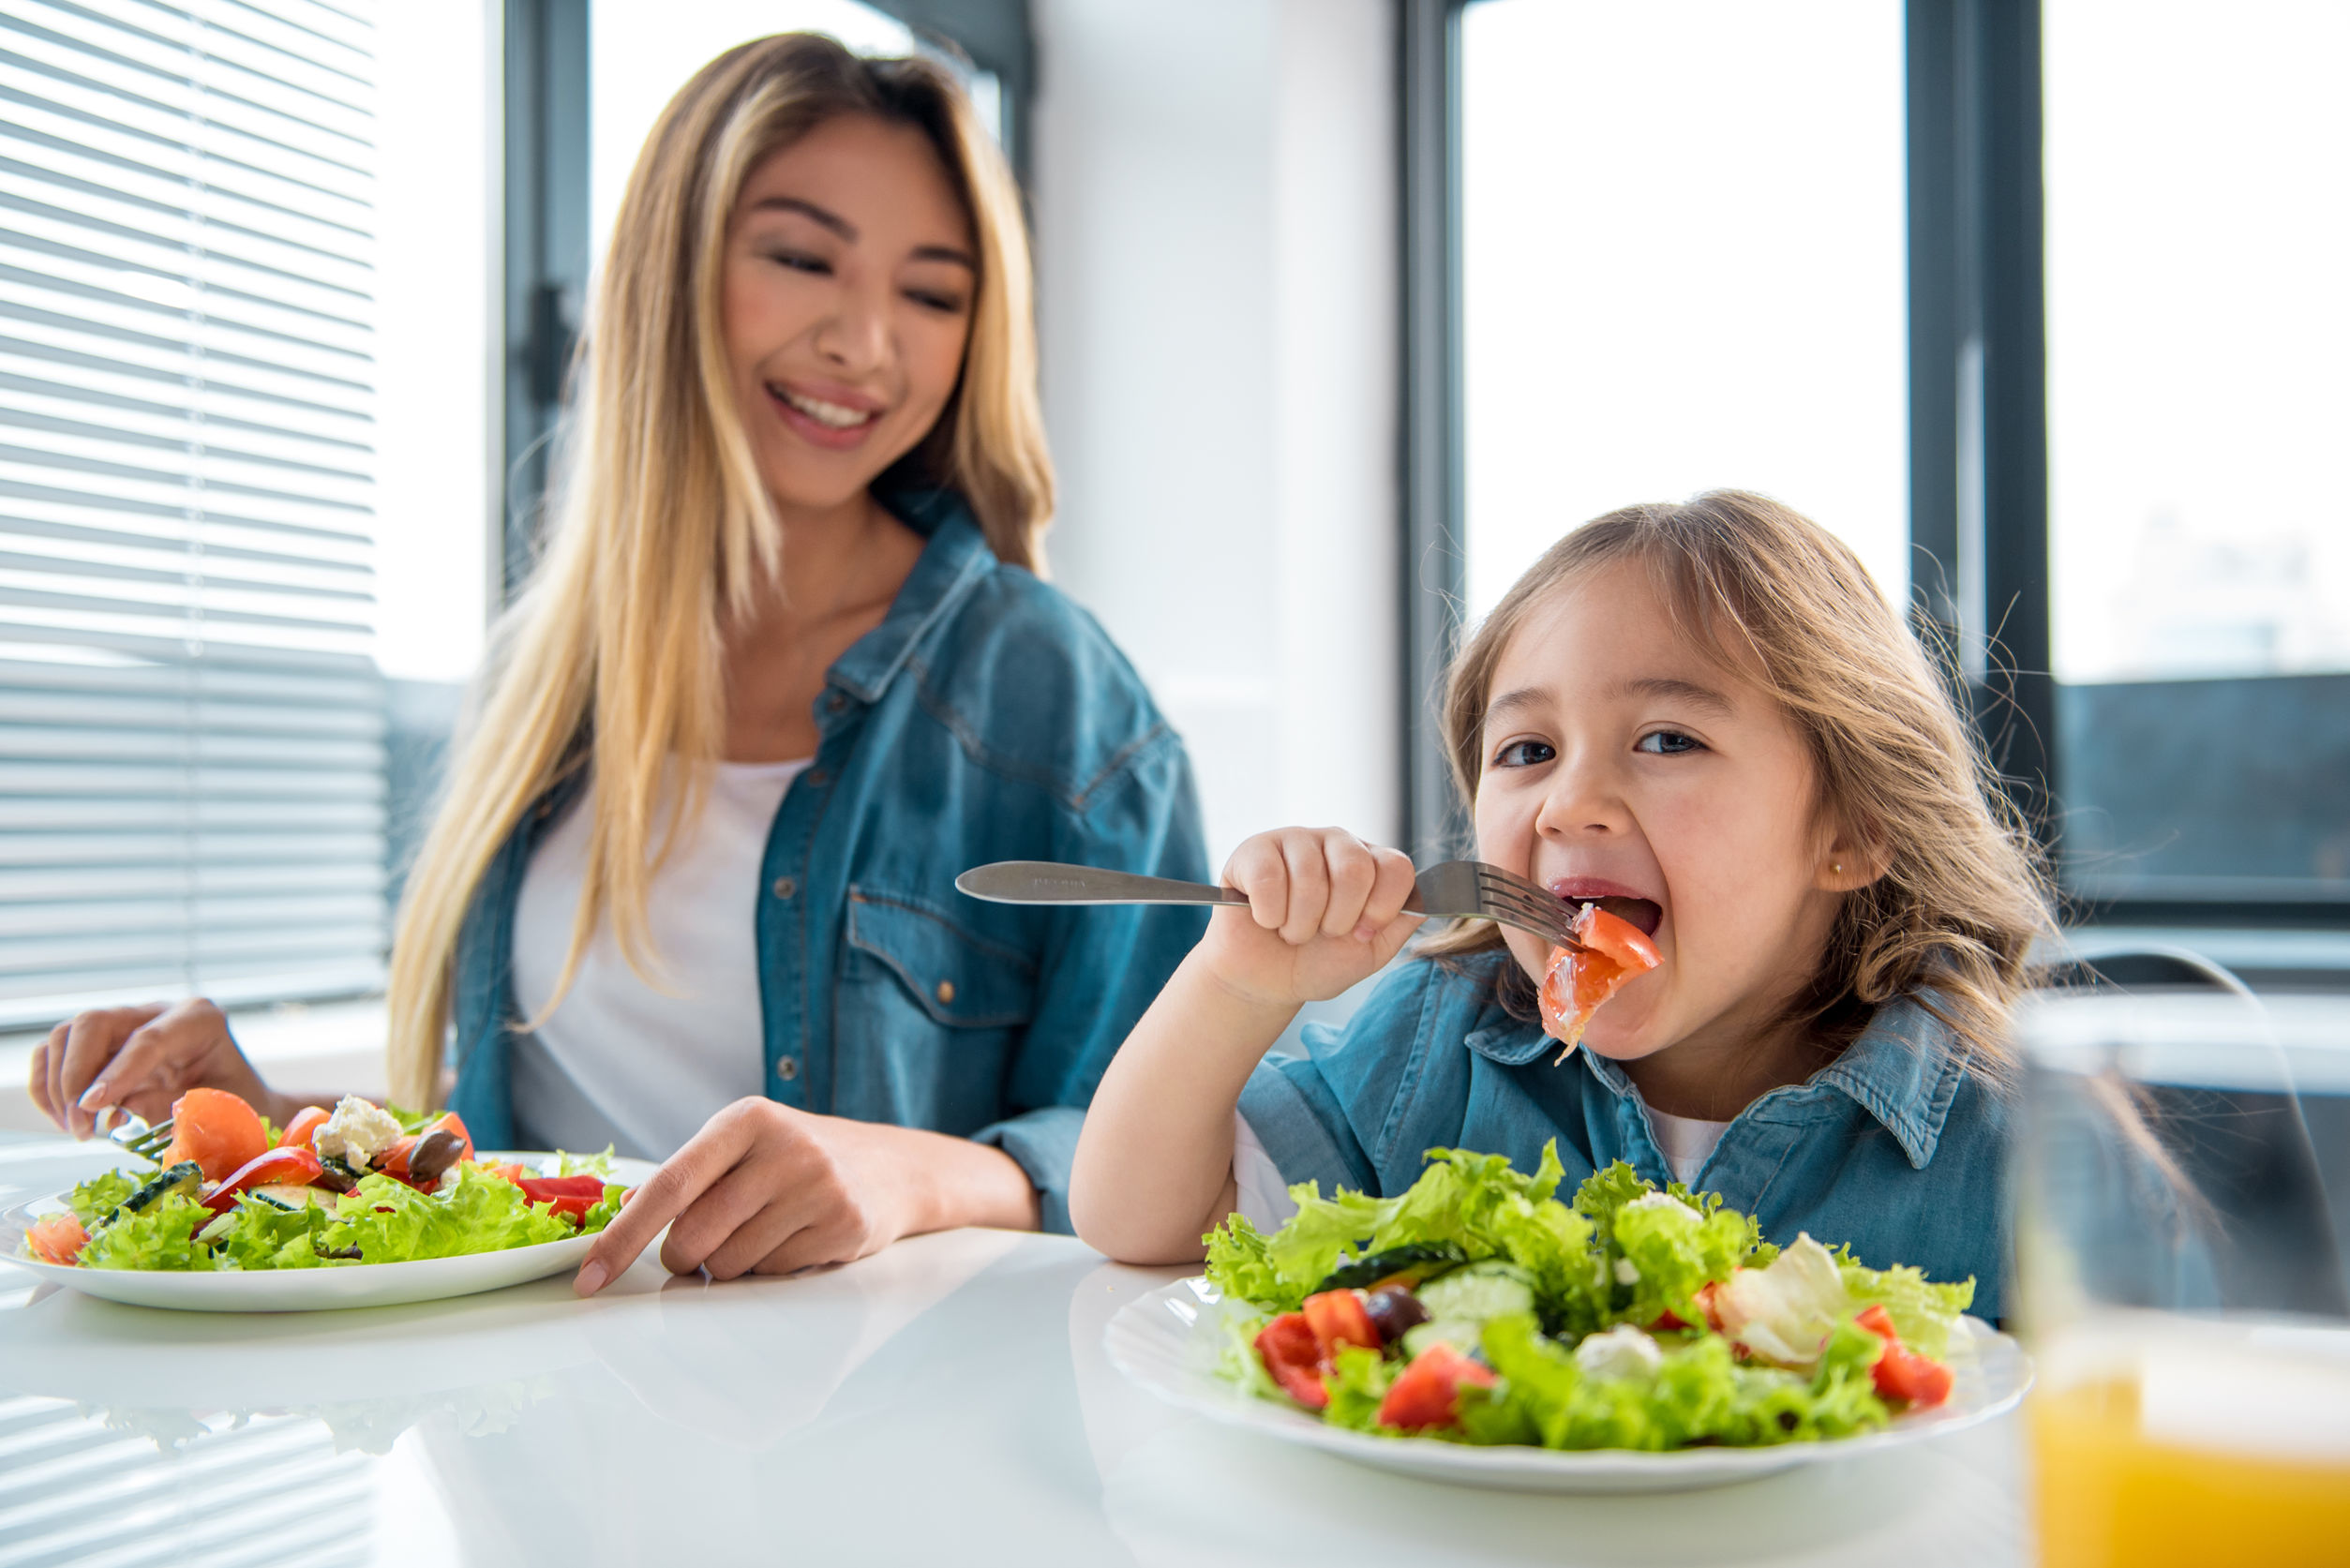 Picky Eaters Palette Programs - Better With Nutrition